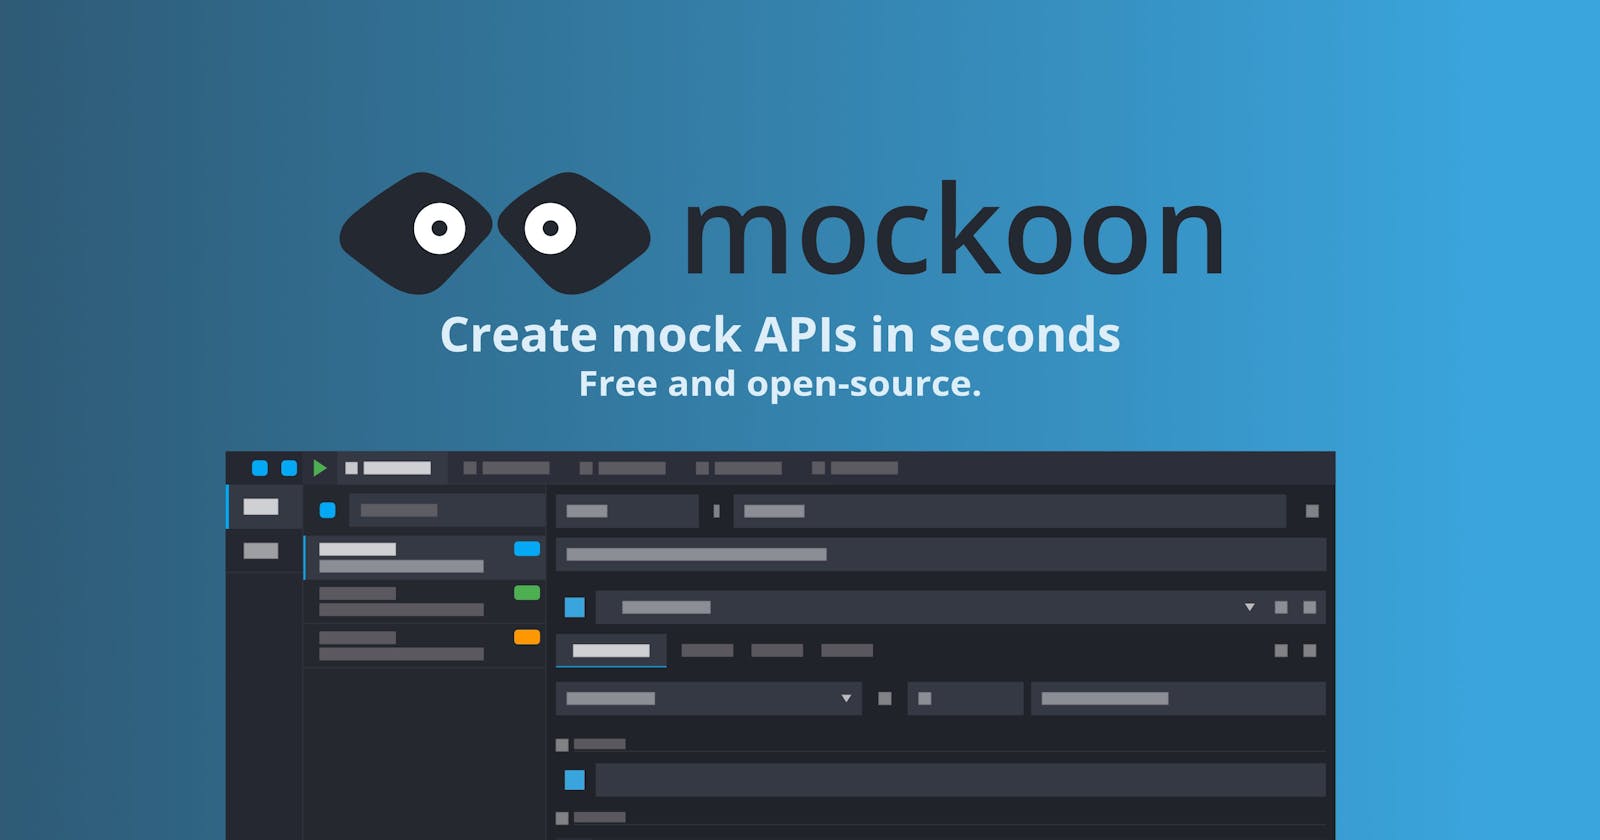 My first leap into OpenSource: Contributing to Mockoon